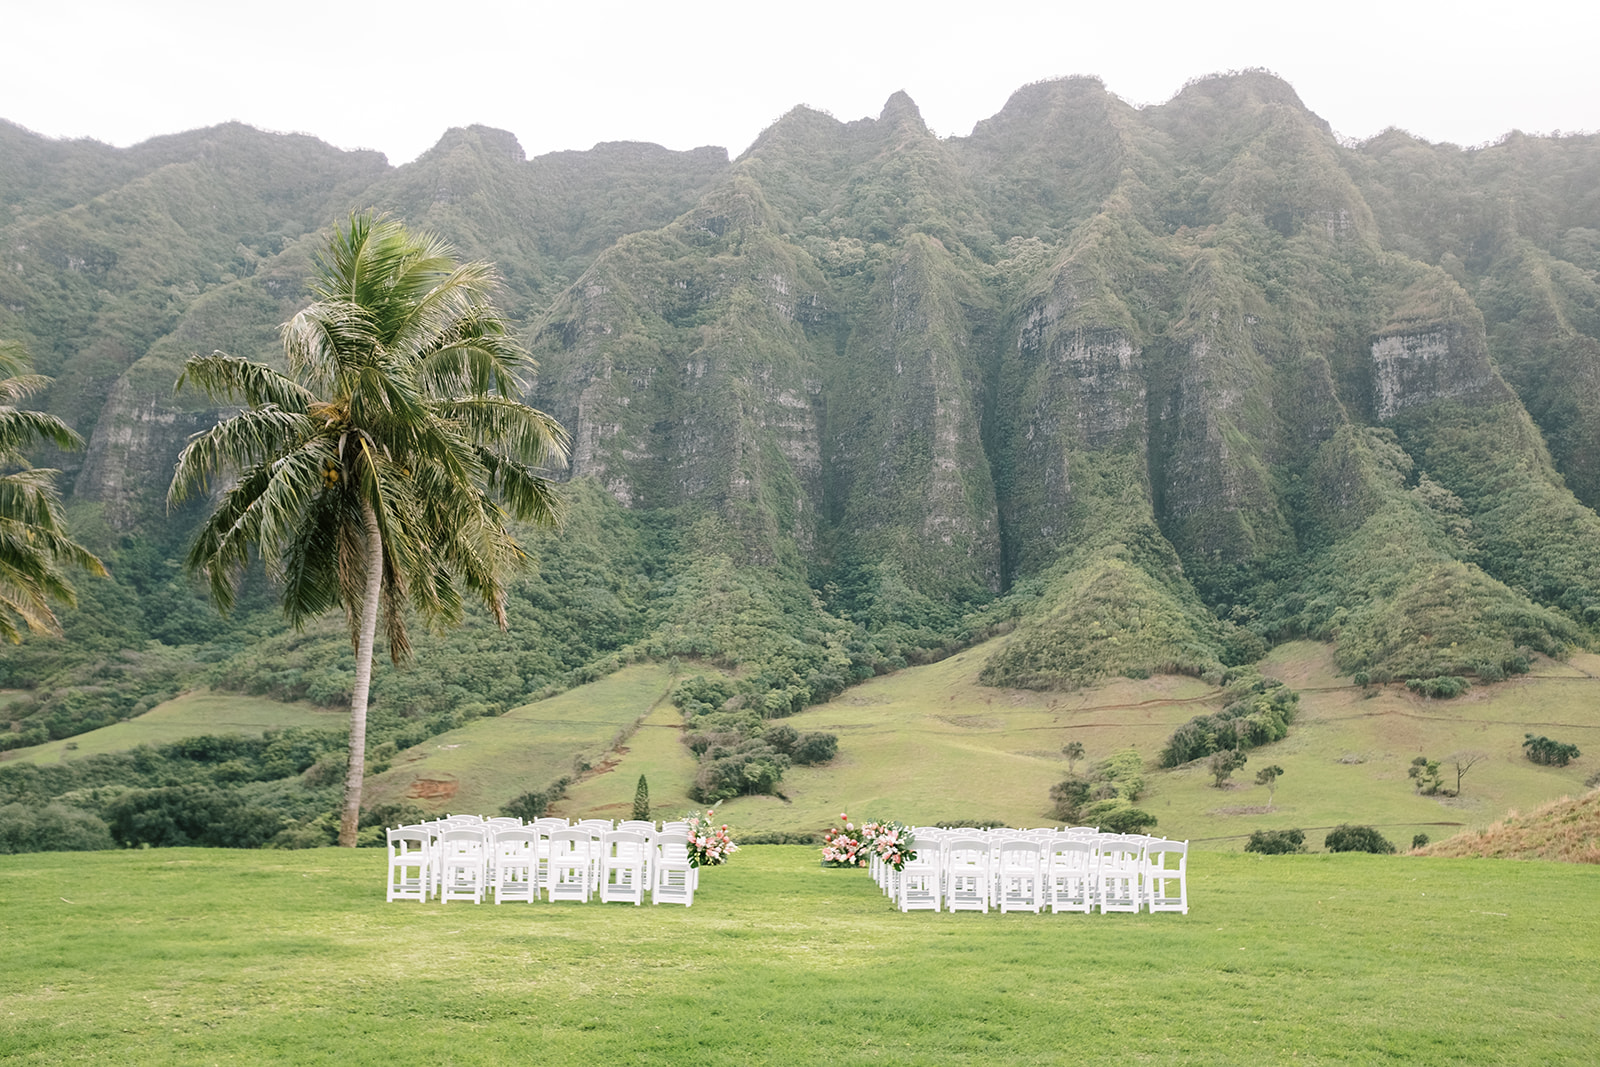 A white wedding ceremony set up in the grass with palm trees in the background.